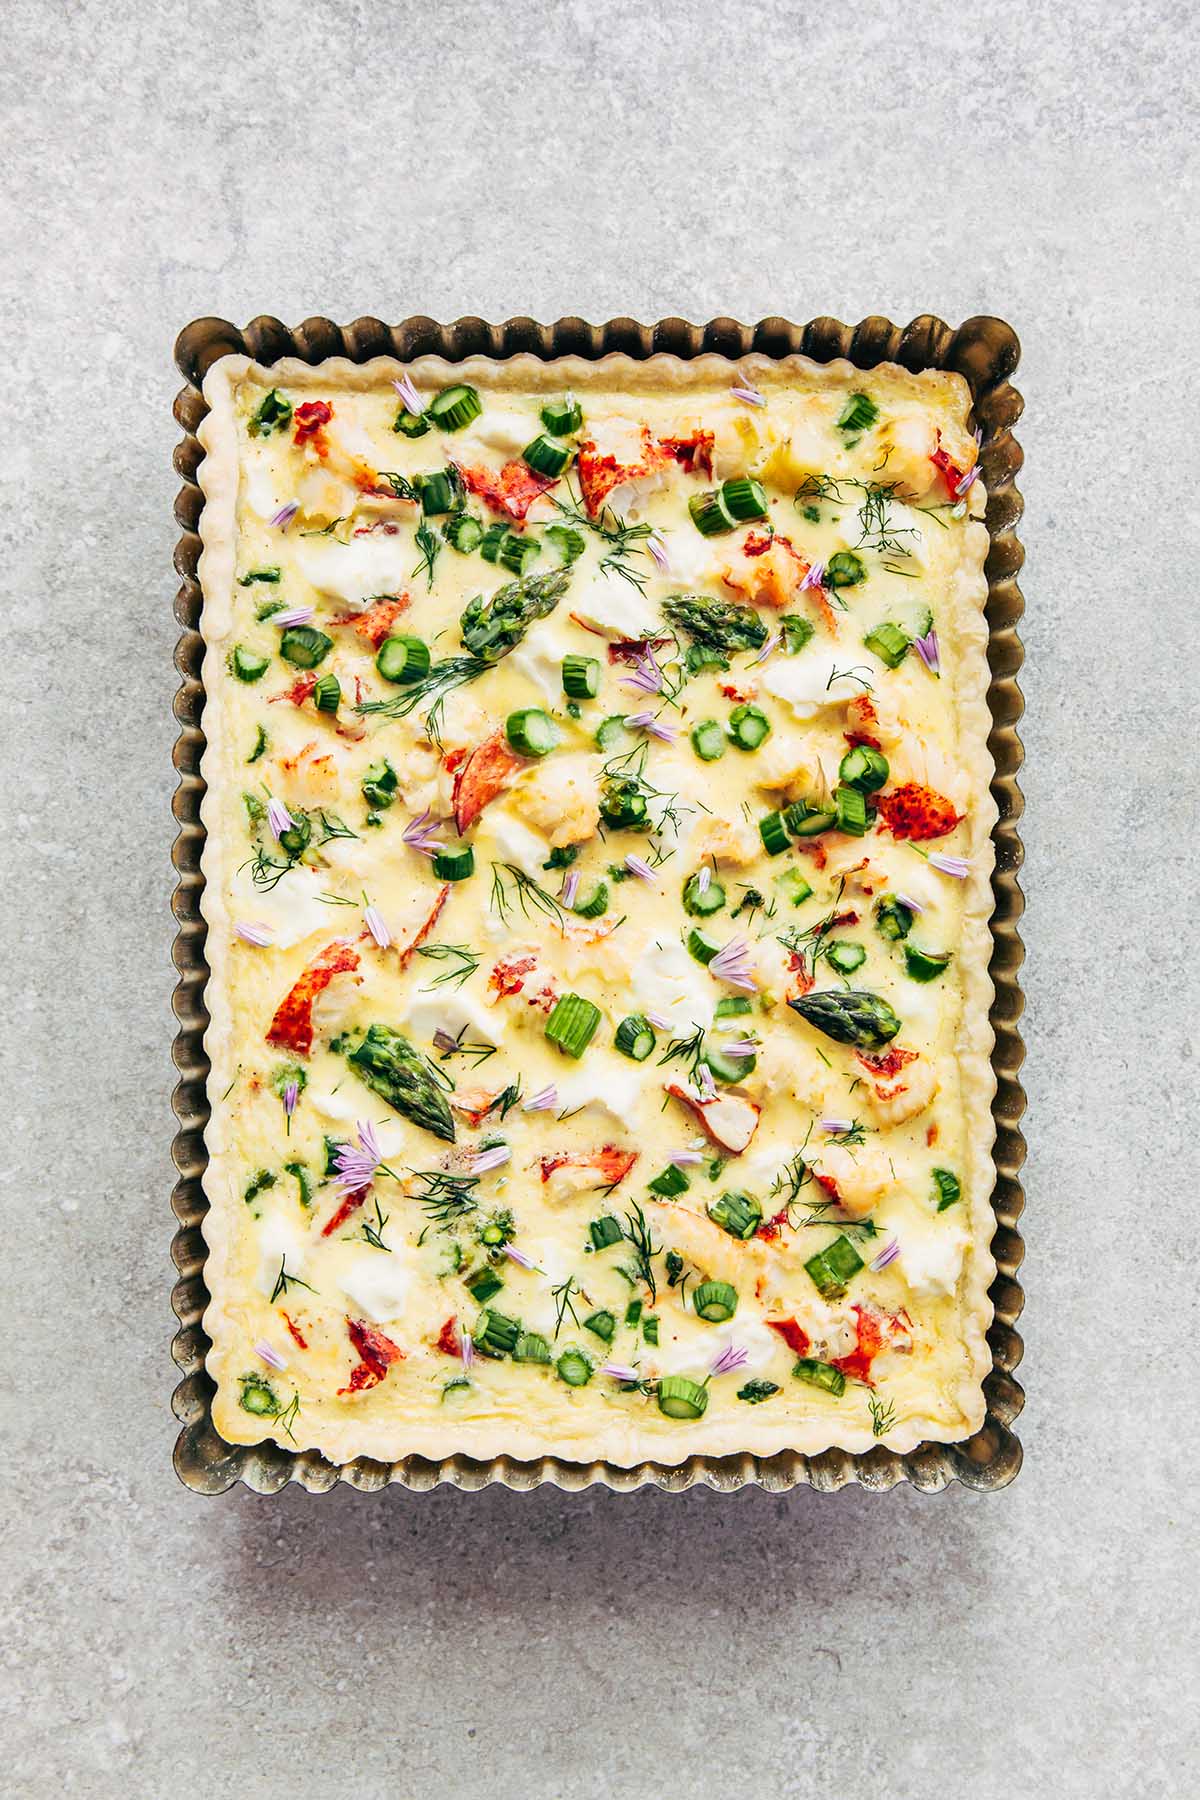 Overhead close up of a lobster quiche with cream cheese and asparagus in a rectangular metal tart tin on a stone surface.